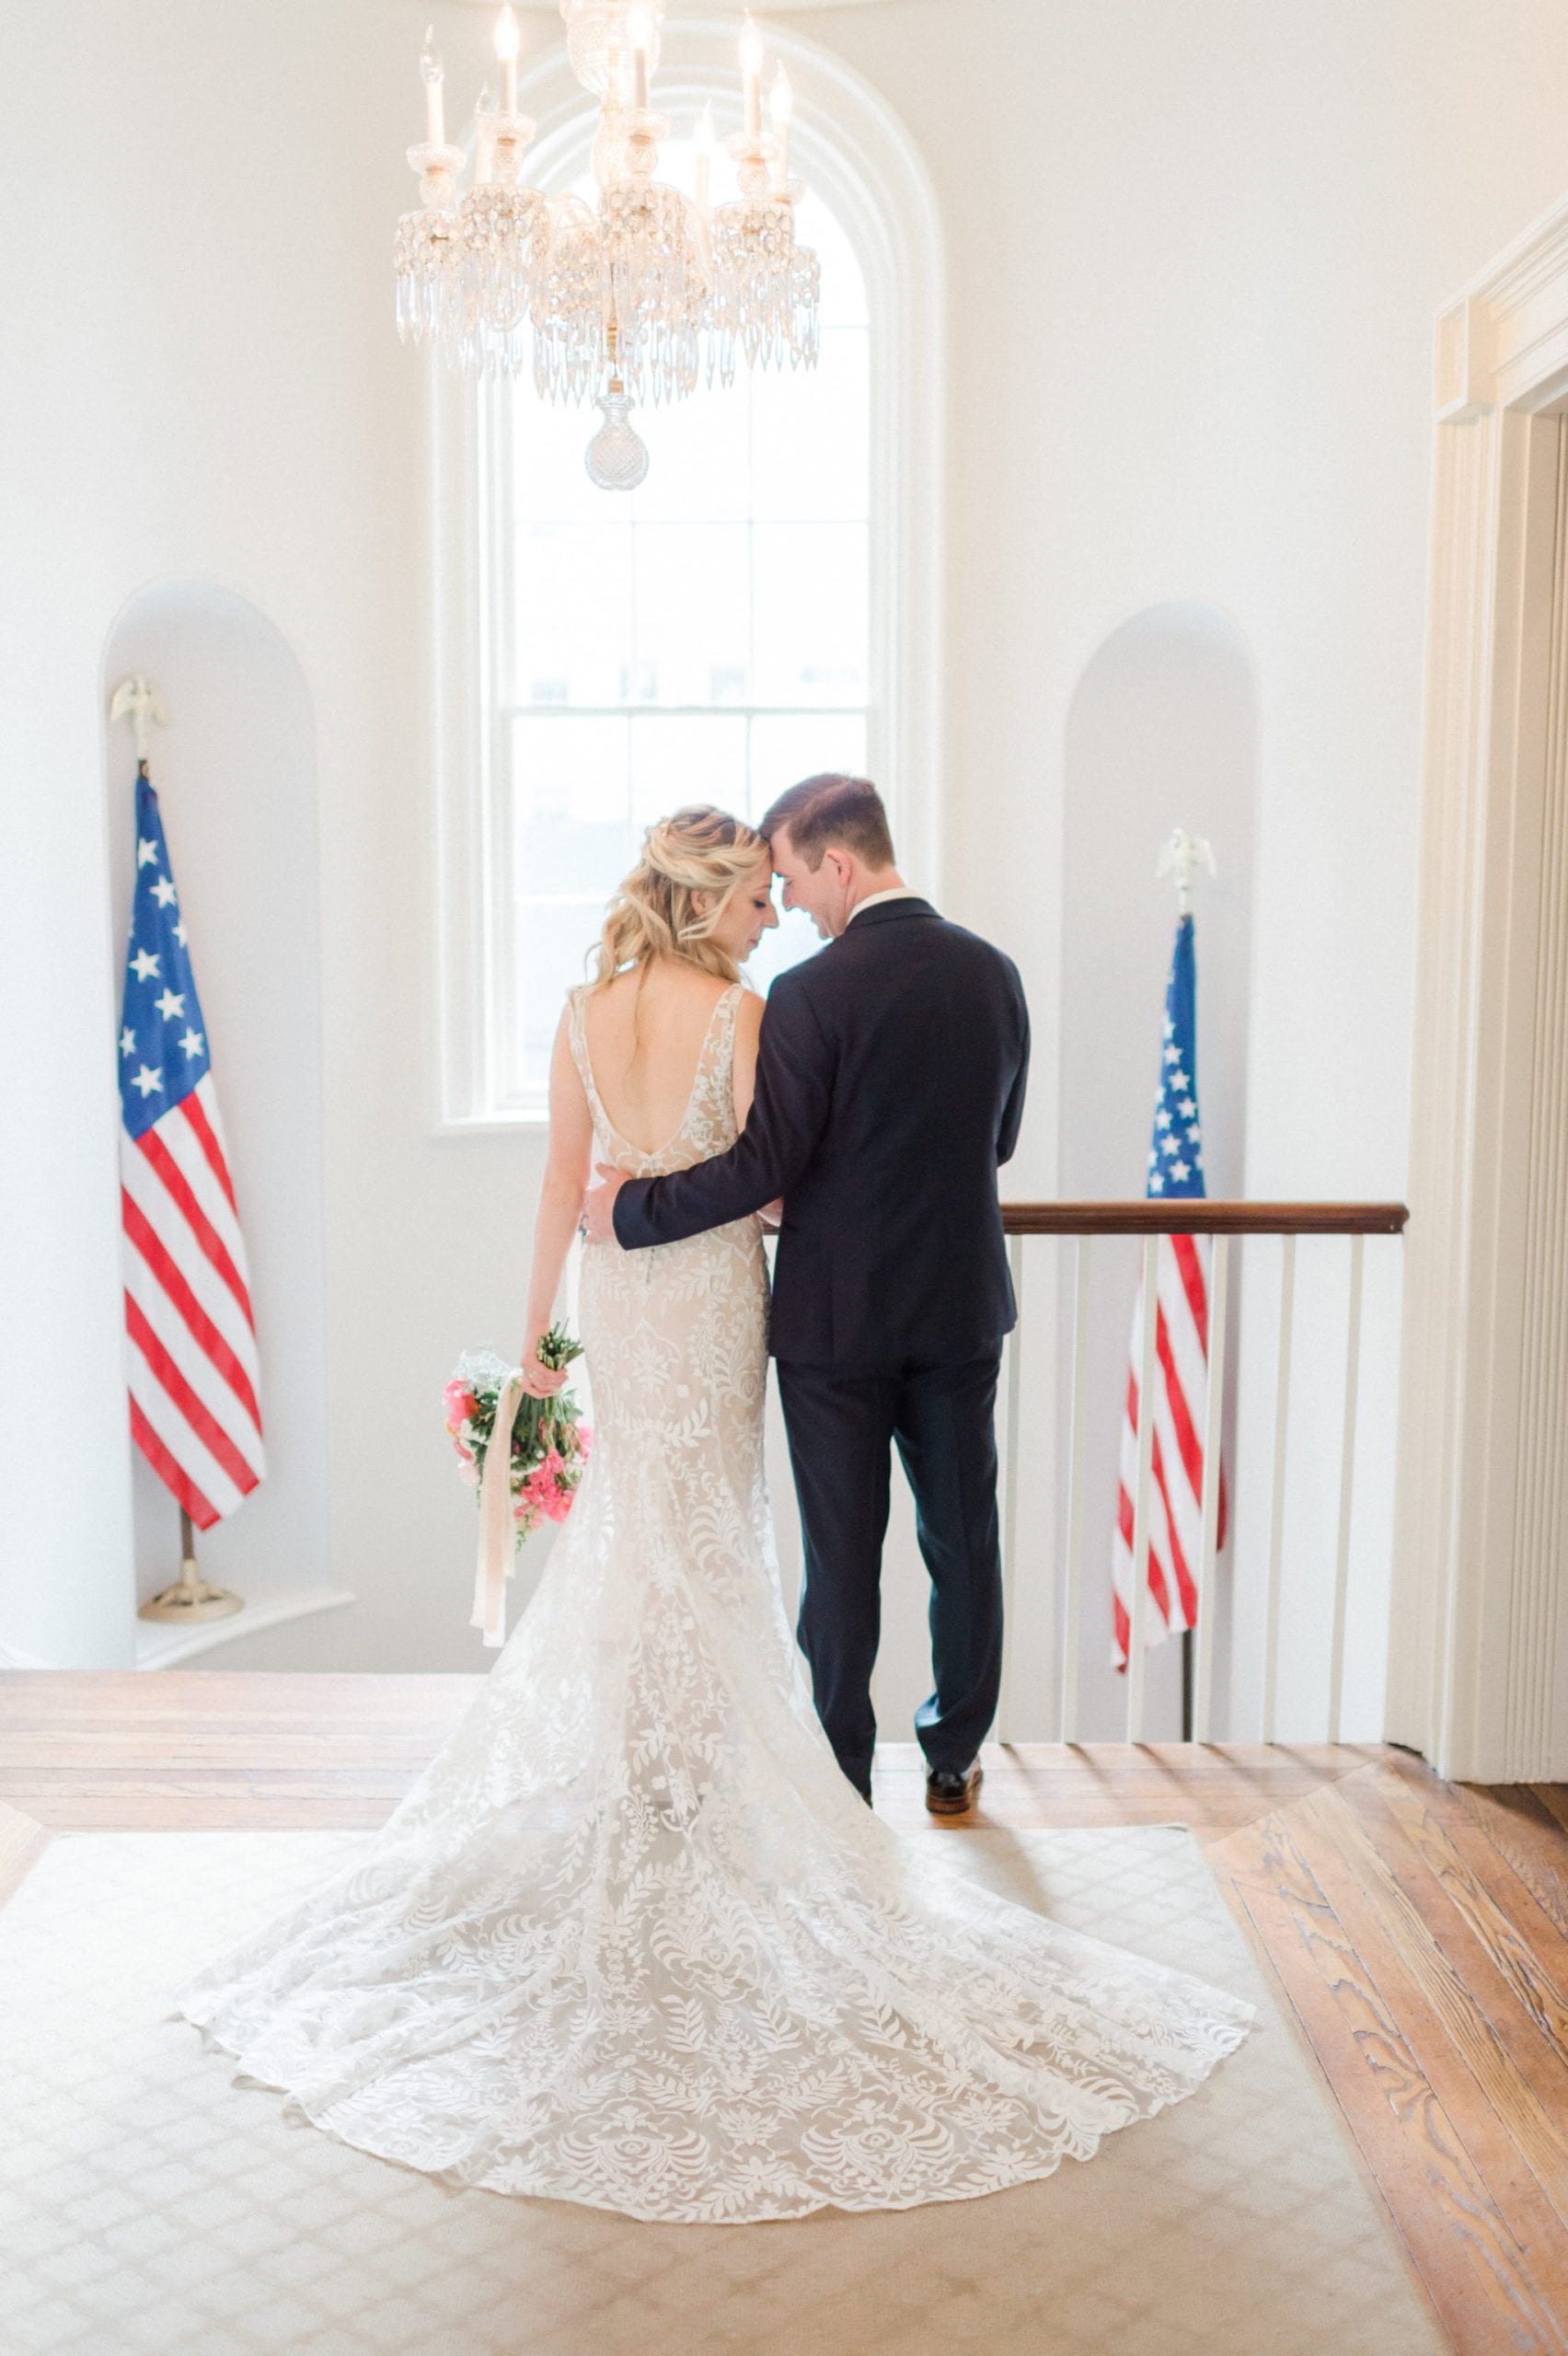 An Alfresco Courtyard Wedding Just Steps From the White House